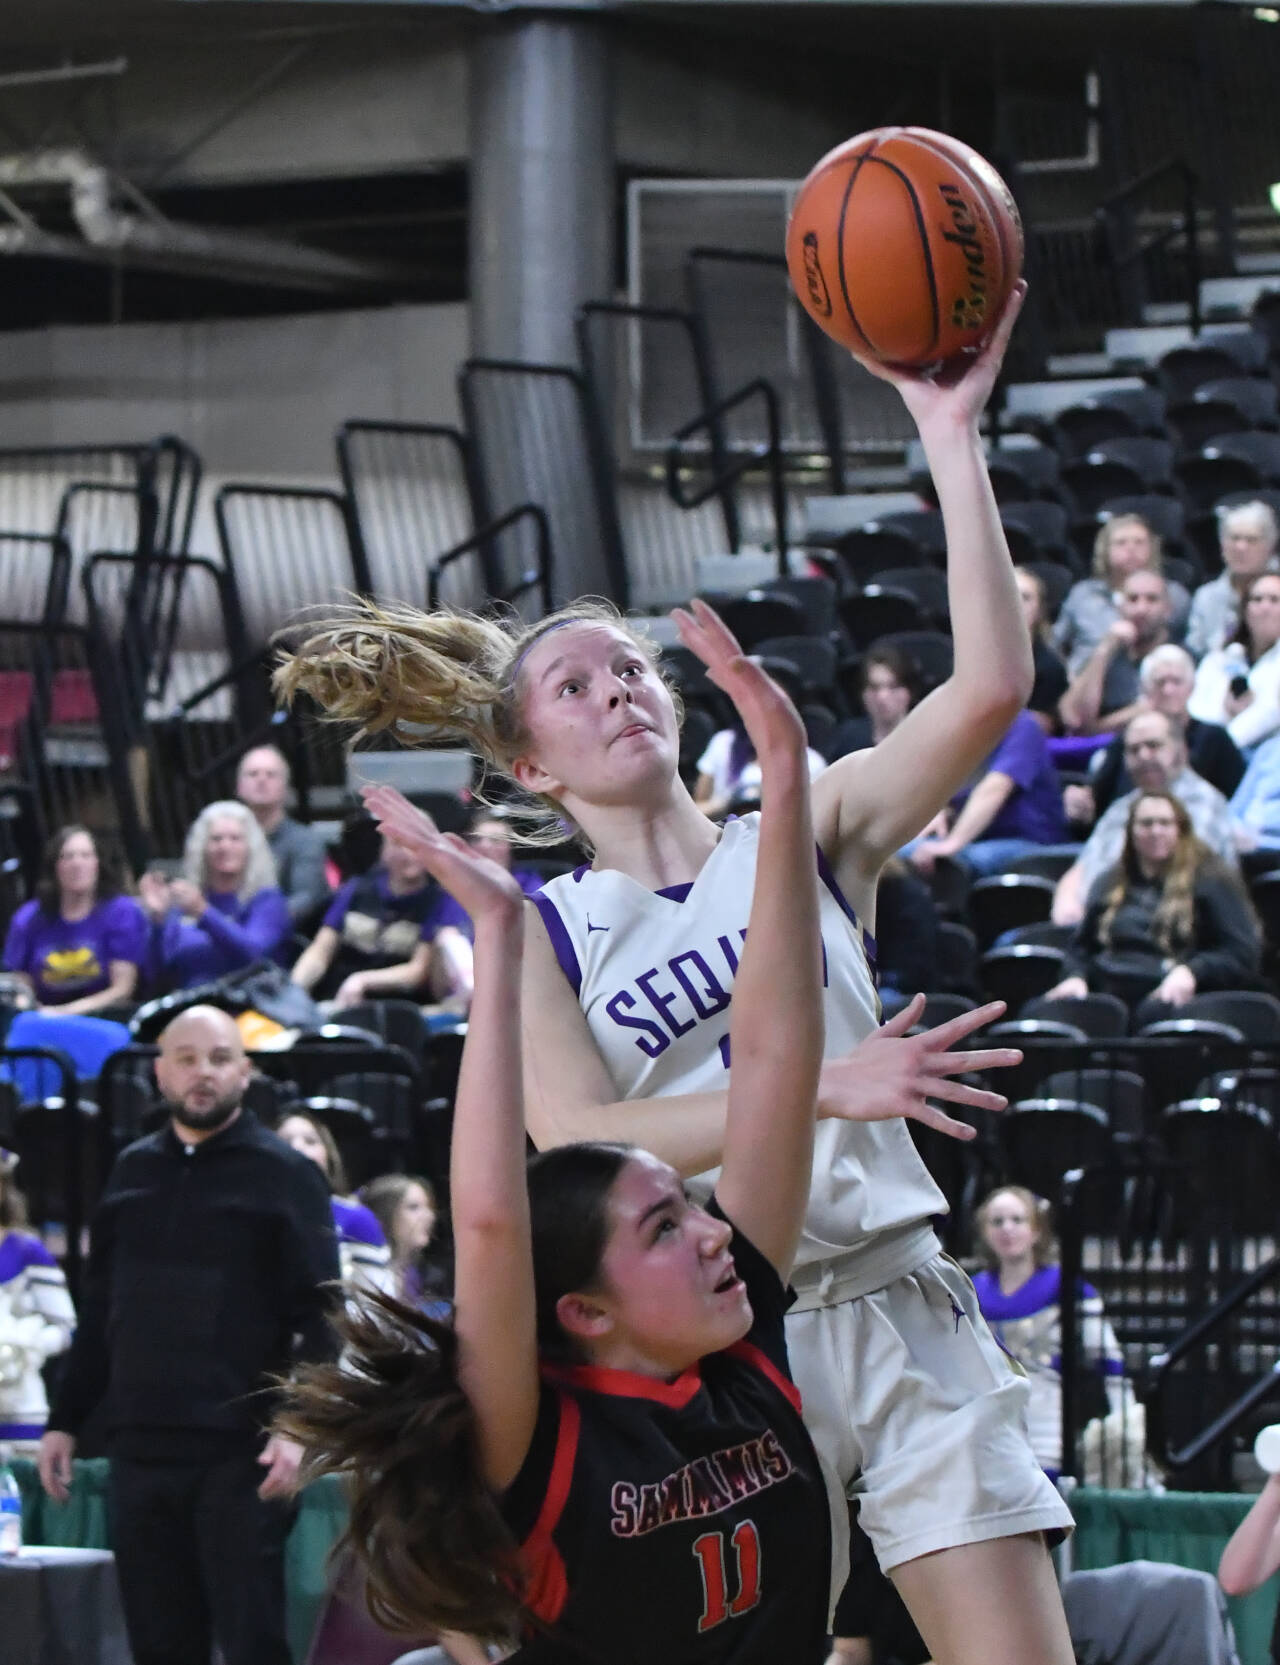 Photo by Jim Heintz / Sequim’s Jolene Vaara looks to get past Sammamish’s Sophia Eastman in the first half of SHS’s 57-37 win over Sammamish at the class 2A state tournament in Yakima on March 1. Vaara was recently named the Peninsula Daily News’ All-Peninsula Girls Basketball MVP.